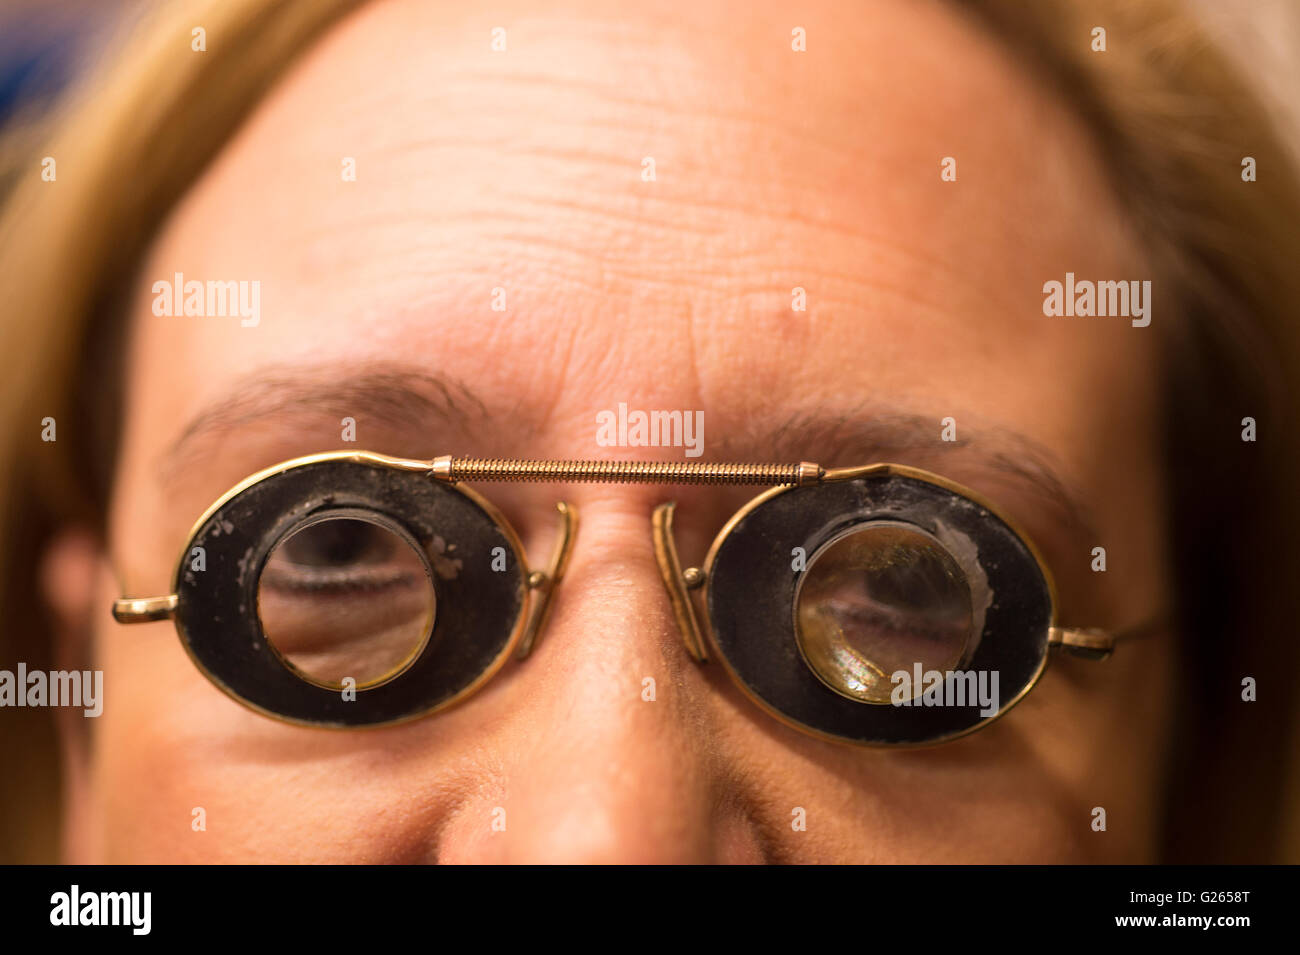 Voyager Press, London UK. 24th May 2016. Rare collection of Spectacles from the 1700s to the 1940s is previewed and modelled before going to the London Antiquarian Book Fair at Olympia. Photo: a pair of magnifying glasses. Credit:  Malcolm Park editorial/Alamy Live News. Stock Photo